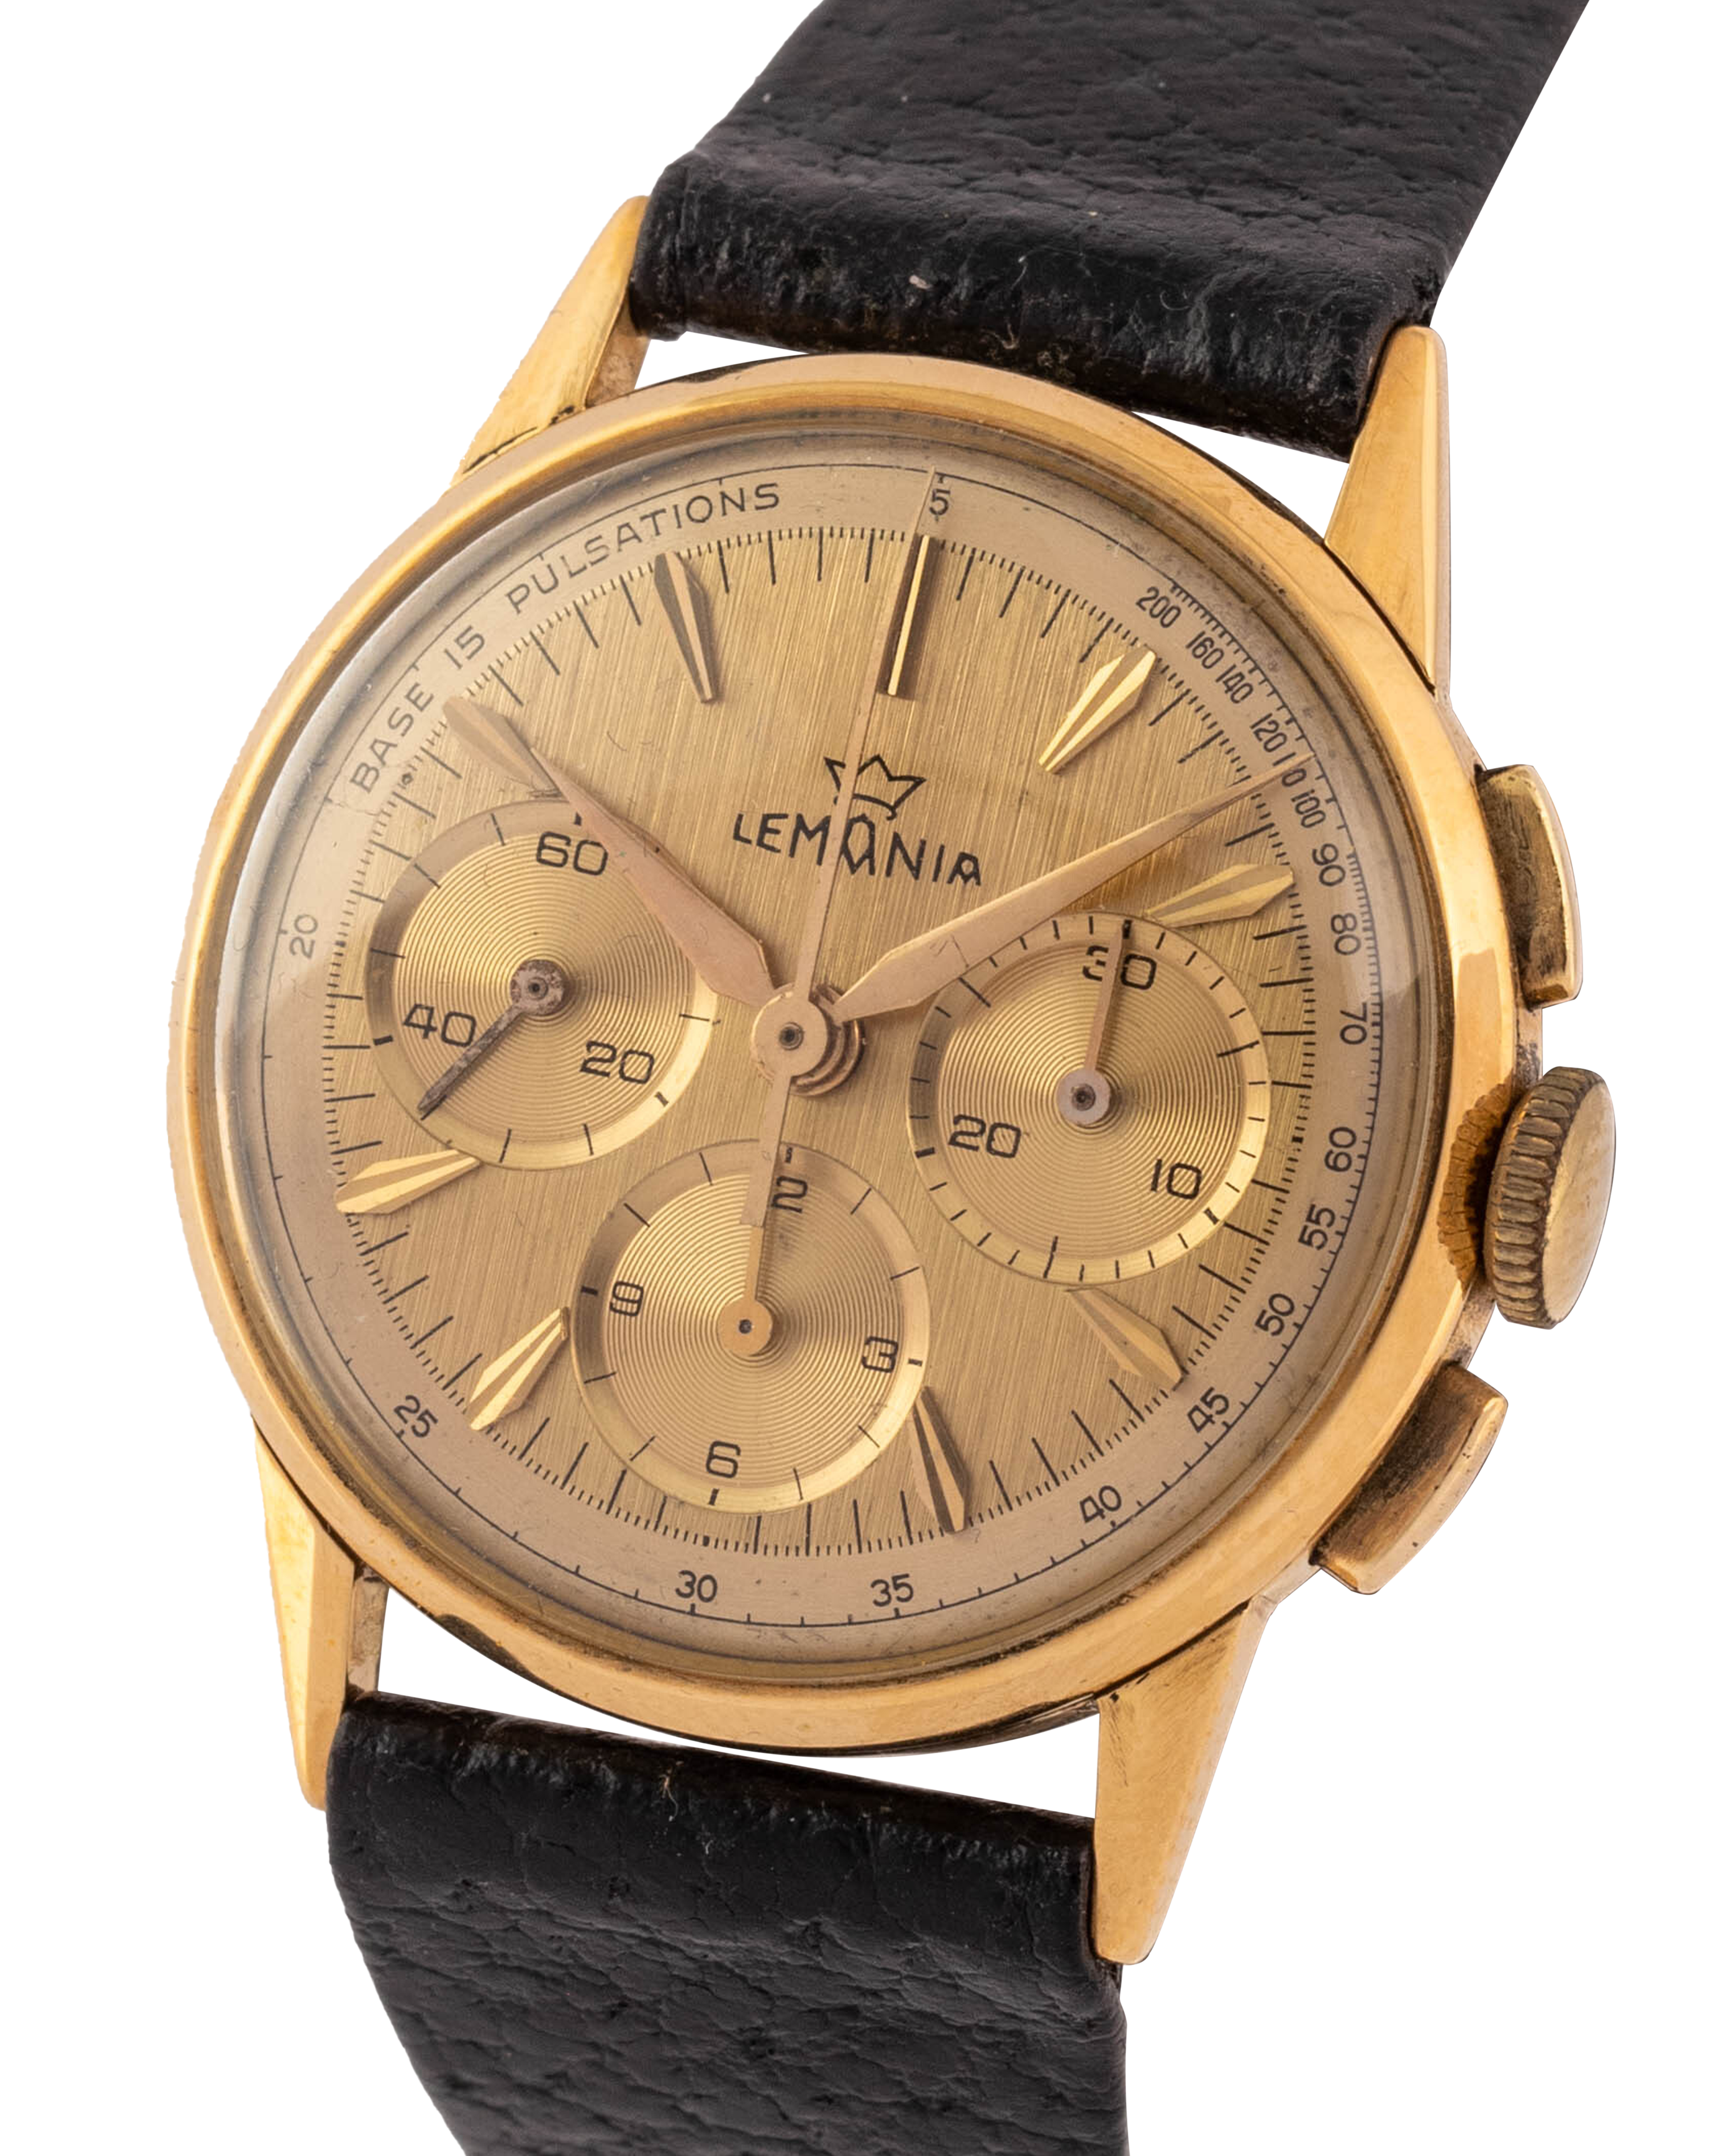 Lemania Chronograph "Champagne dial" wrist watch, in 18kt yellow gold 